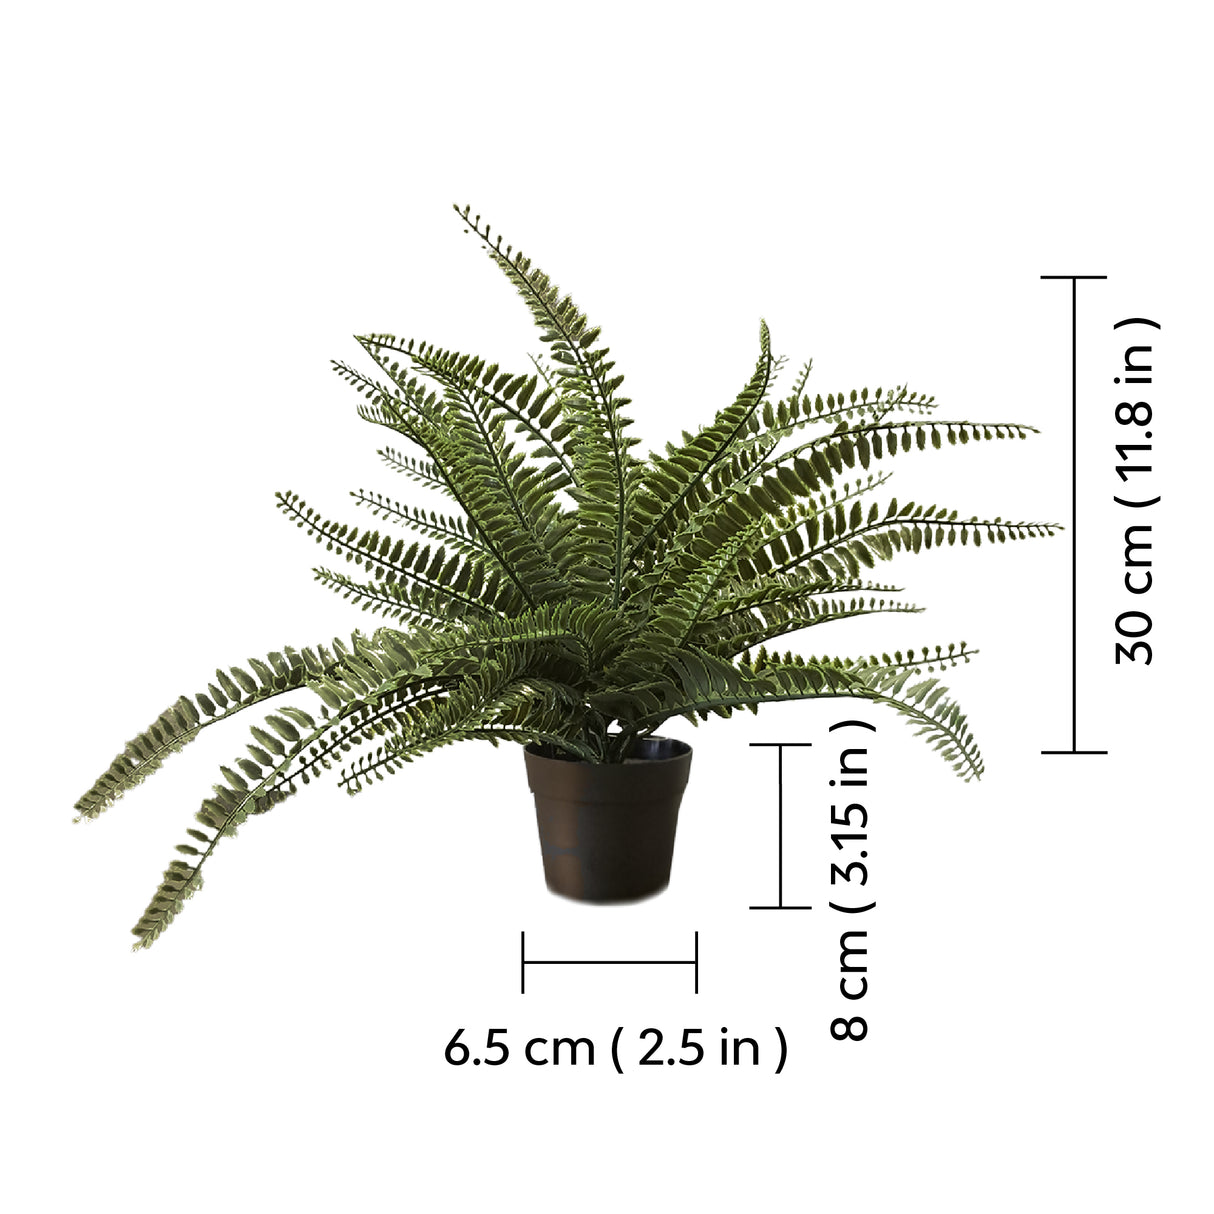 Artificial ferns with size dimensions